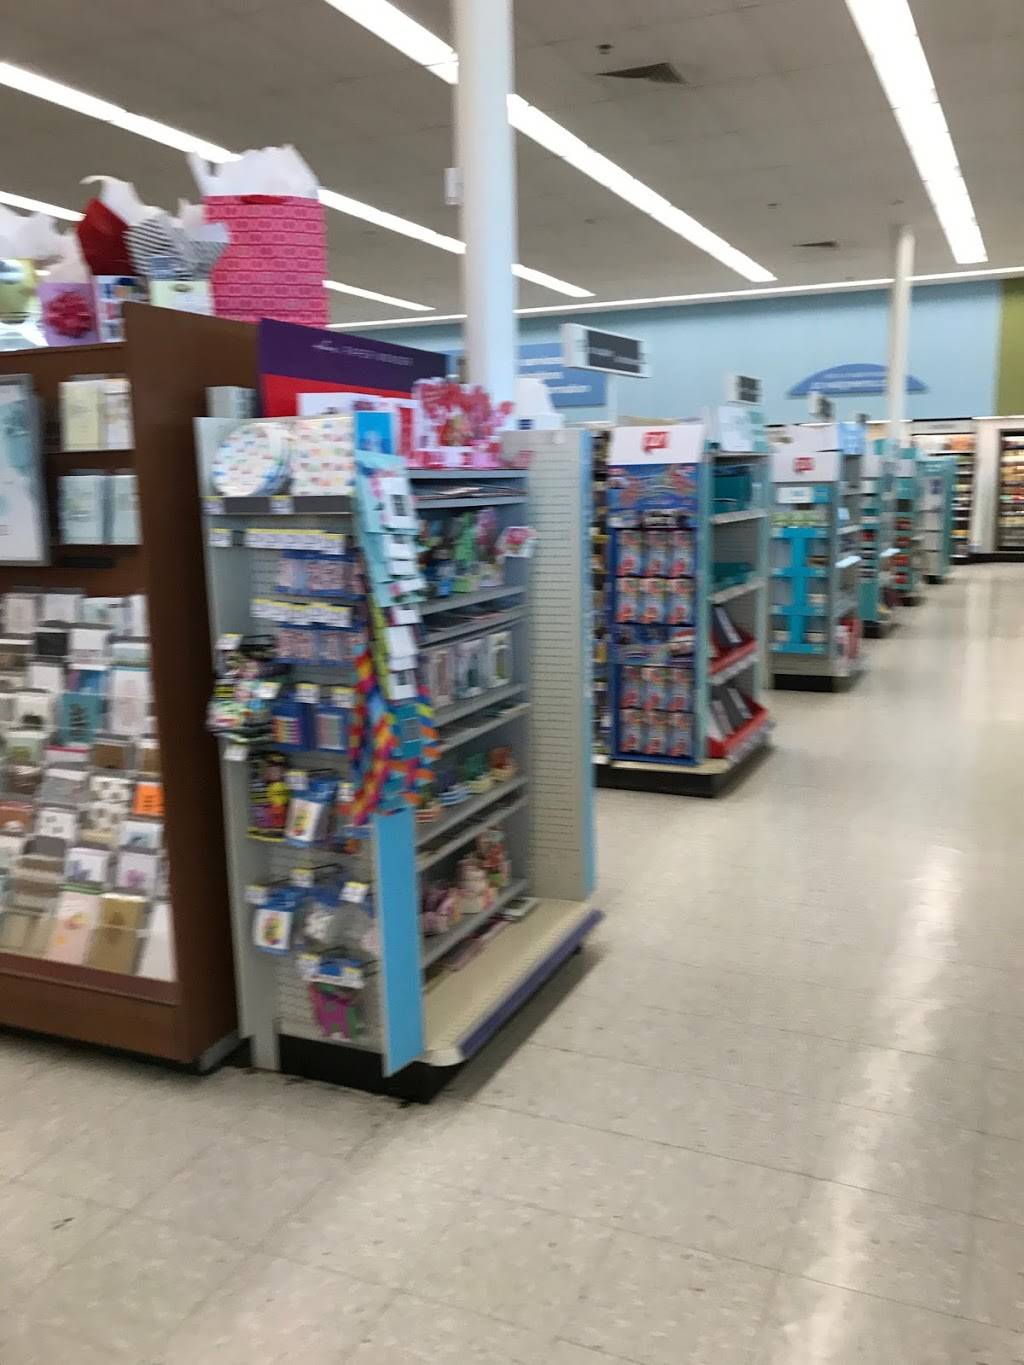 Walgreens Pharmacy | 6000 Coors Blvd NW, Albuquerque, NM 87120 | Phone: (505) 899-0989